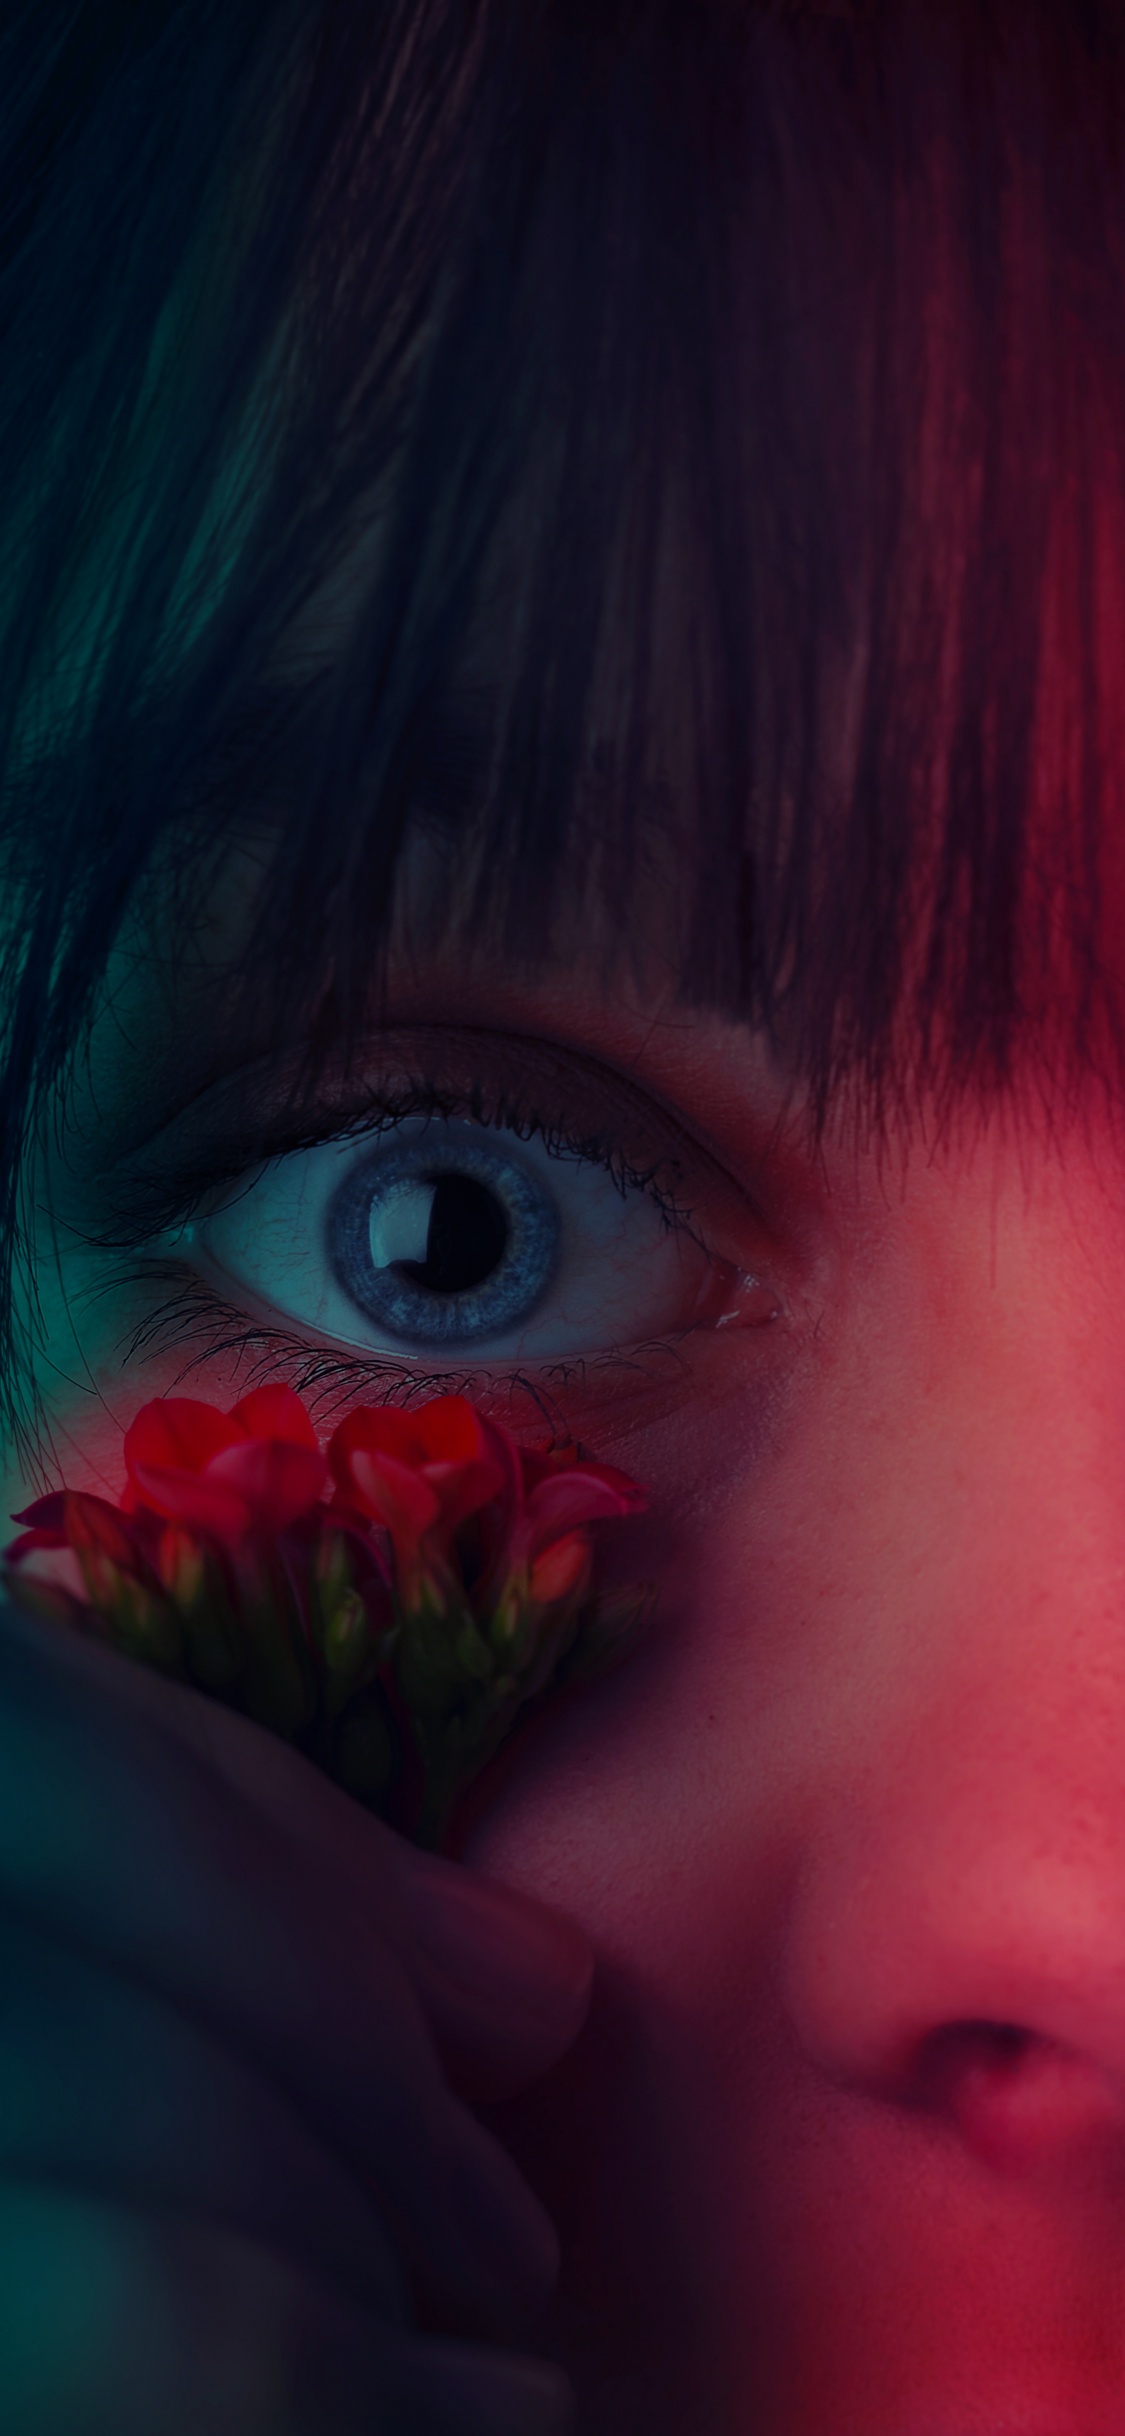 Girl With Red Flower on Her Face. Wallpaper in 1125x2436 Resolution